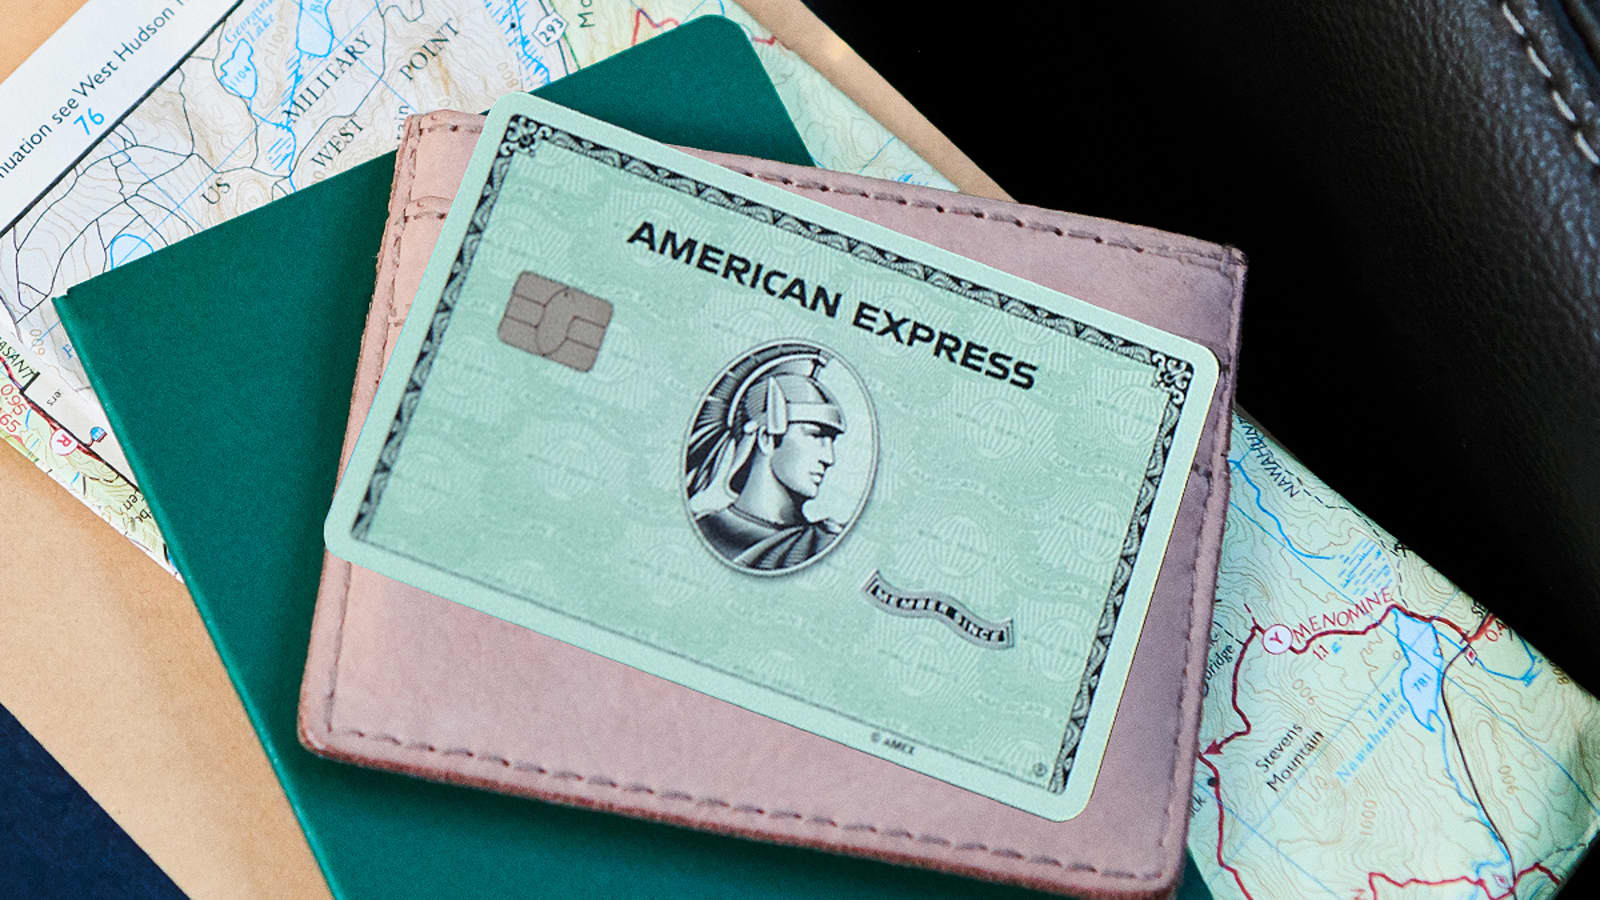 Review: American Express Green Card